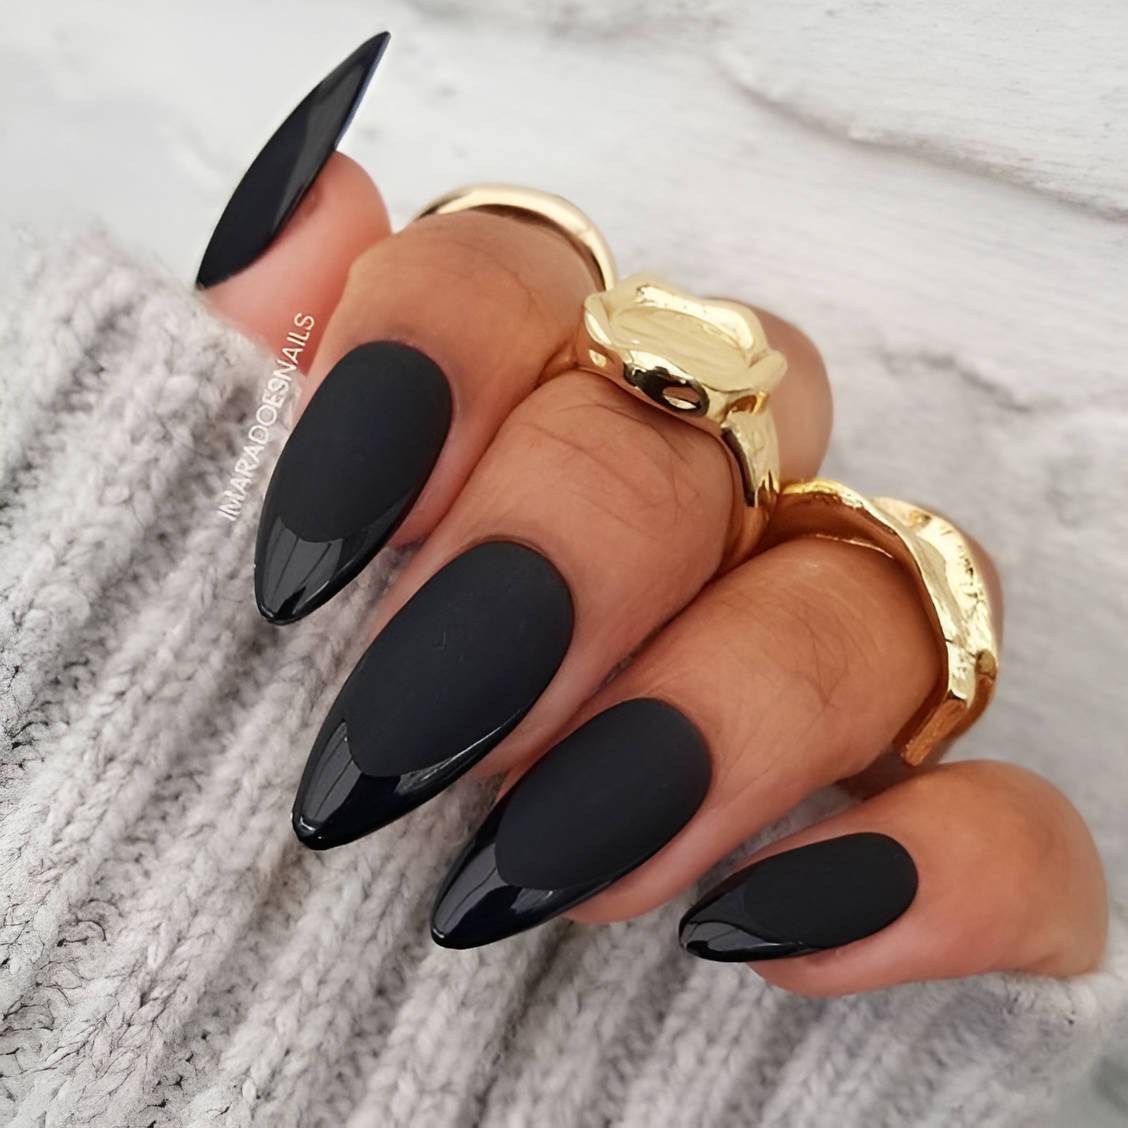 30 Classy Black Nail Designs To Glam You Up - 237